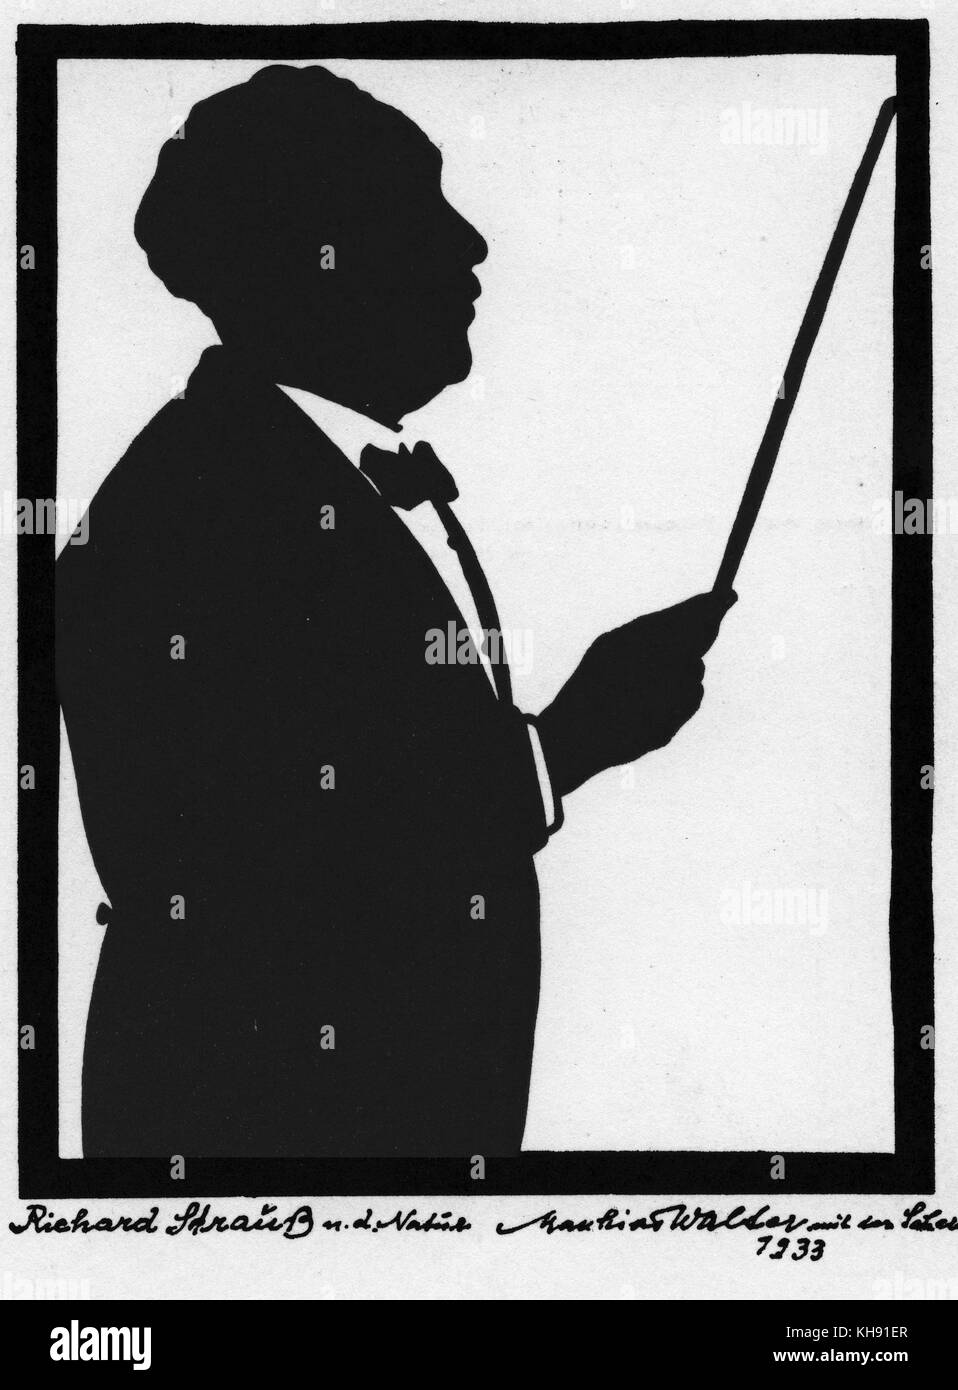 Richard Strauss - silhouette  by Matthias Walter, 1933.  German composer & conductor, 1864-1949. Stock Photo